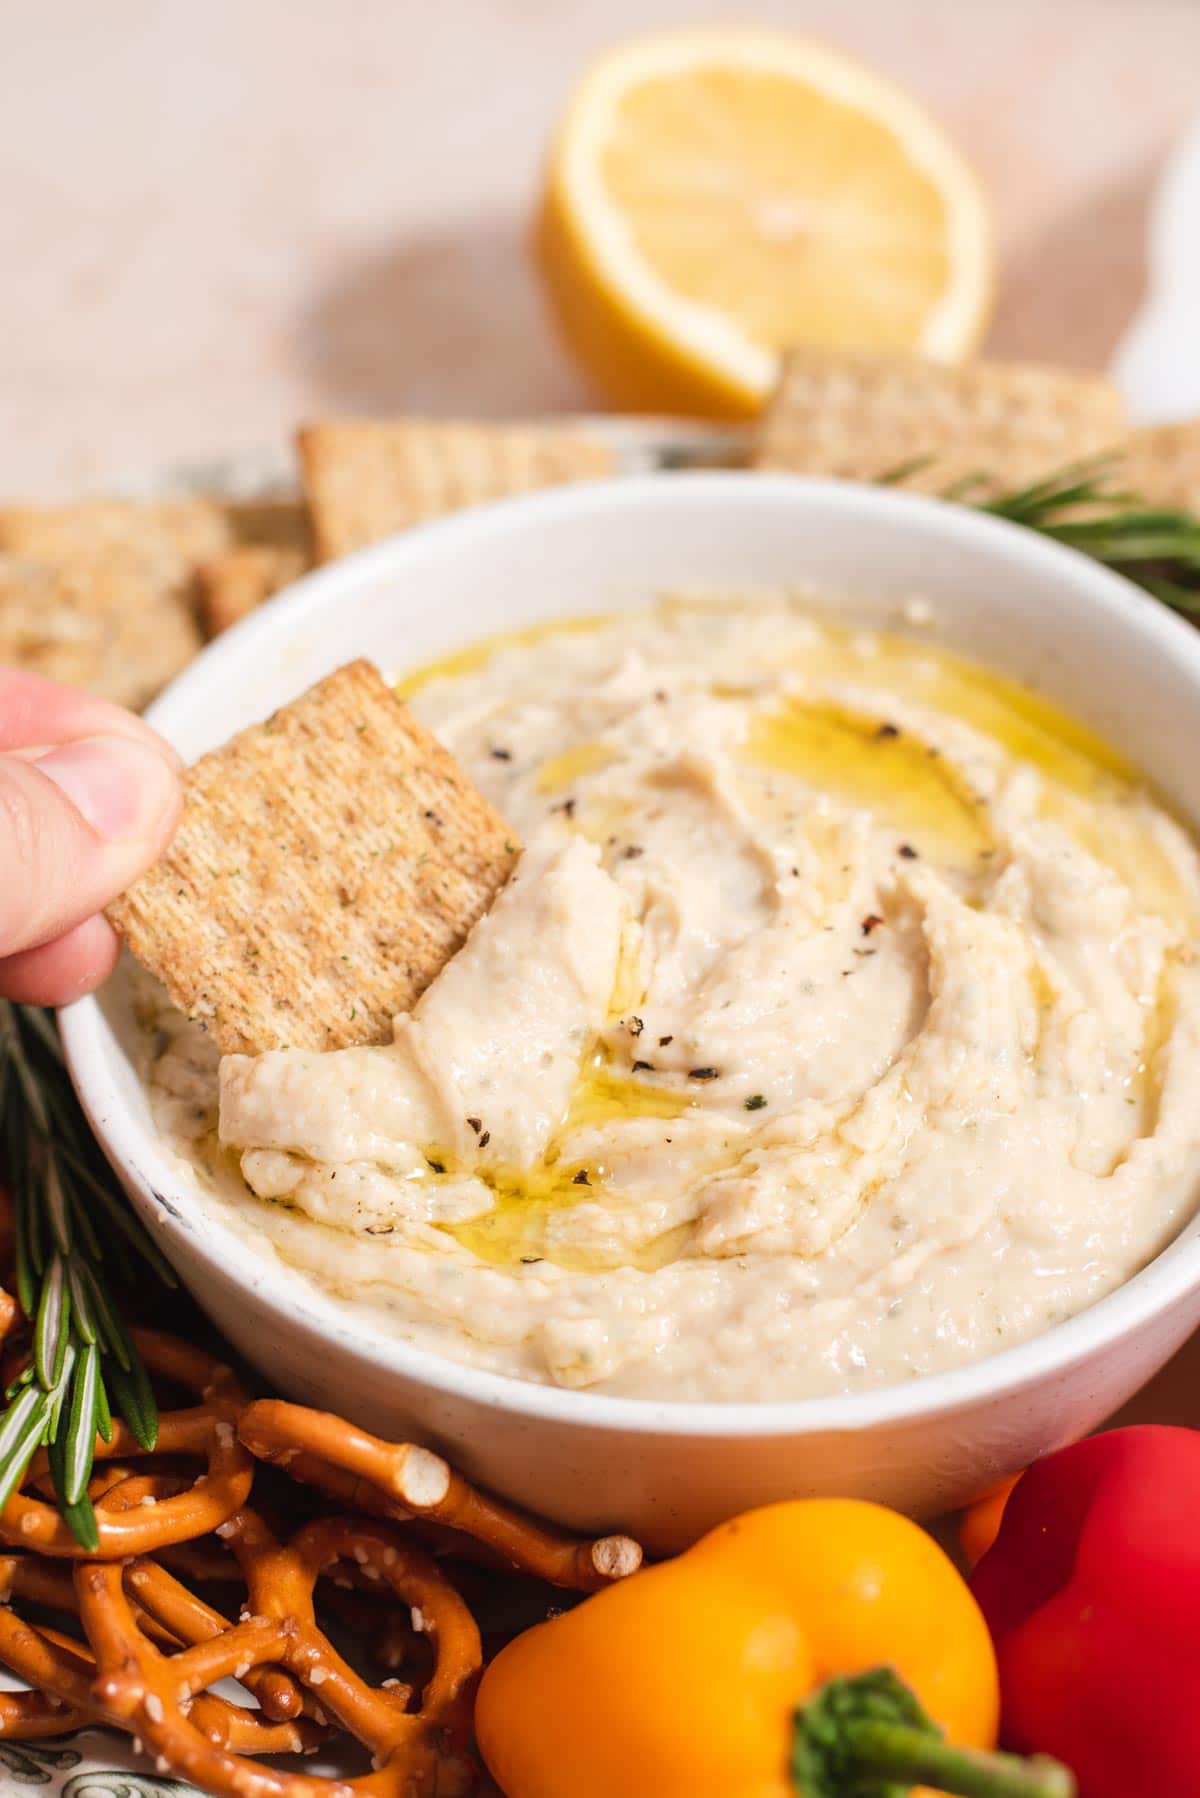 Triscuit being dipped into a white bowl with white bean dip topped with olive oil